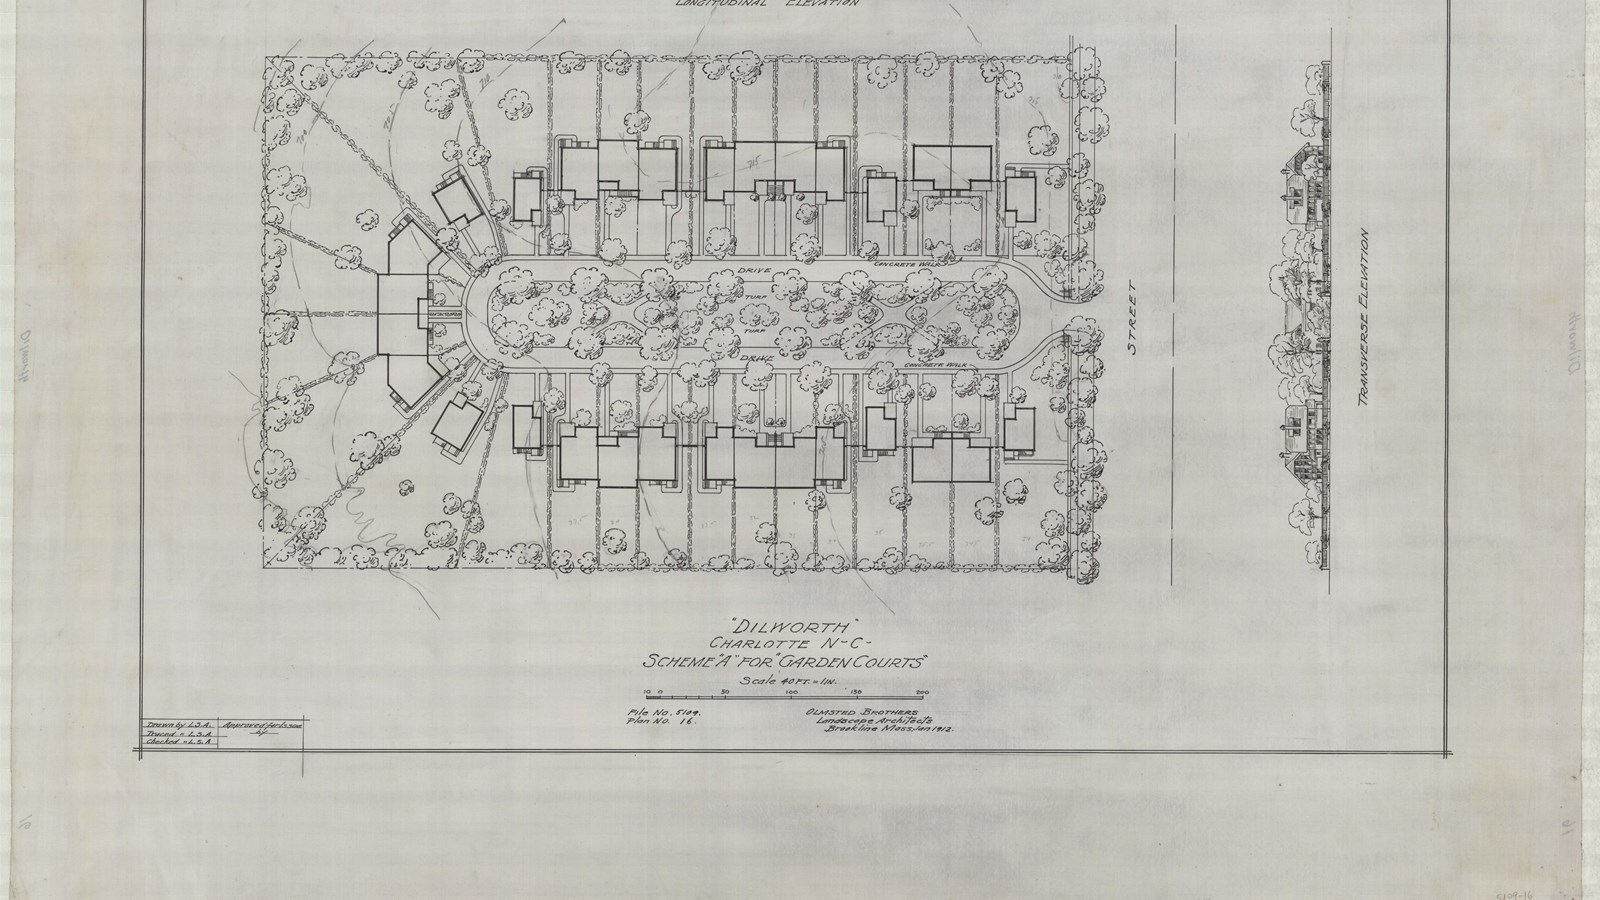 Pencil plan of oval green space with trees, with lots for homes around the green space